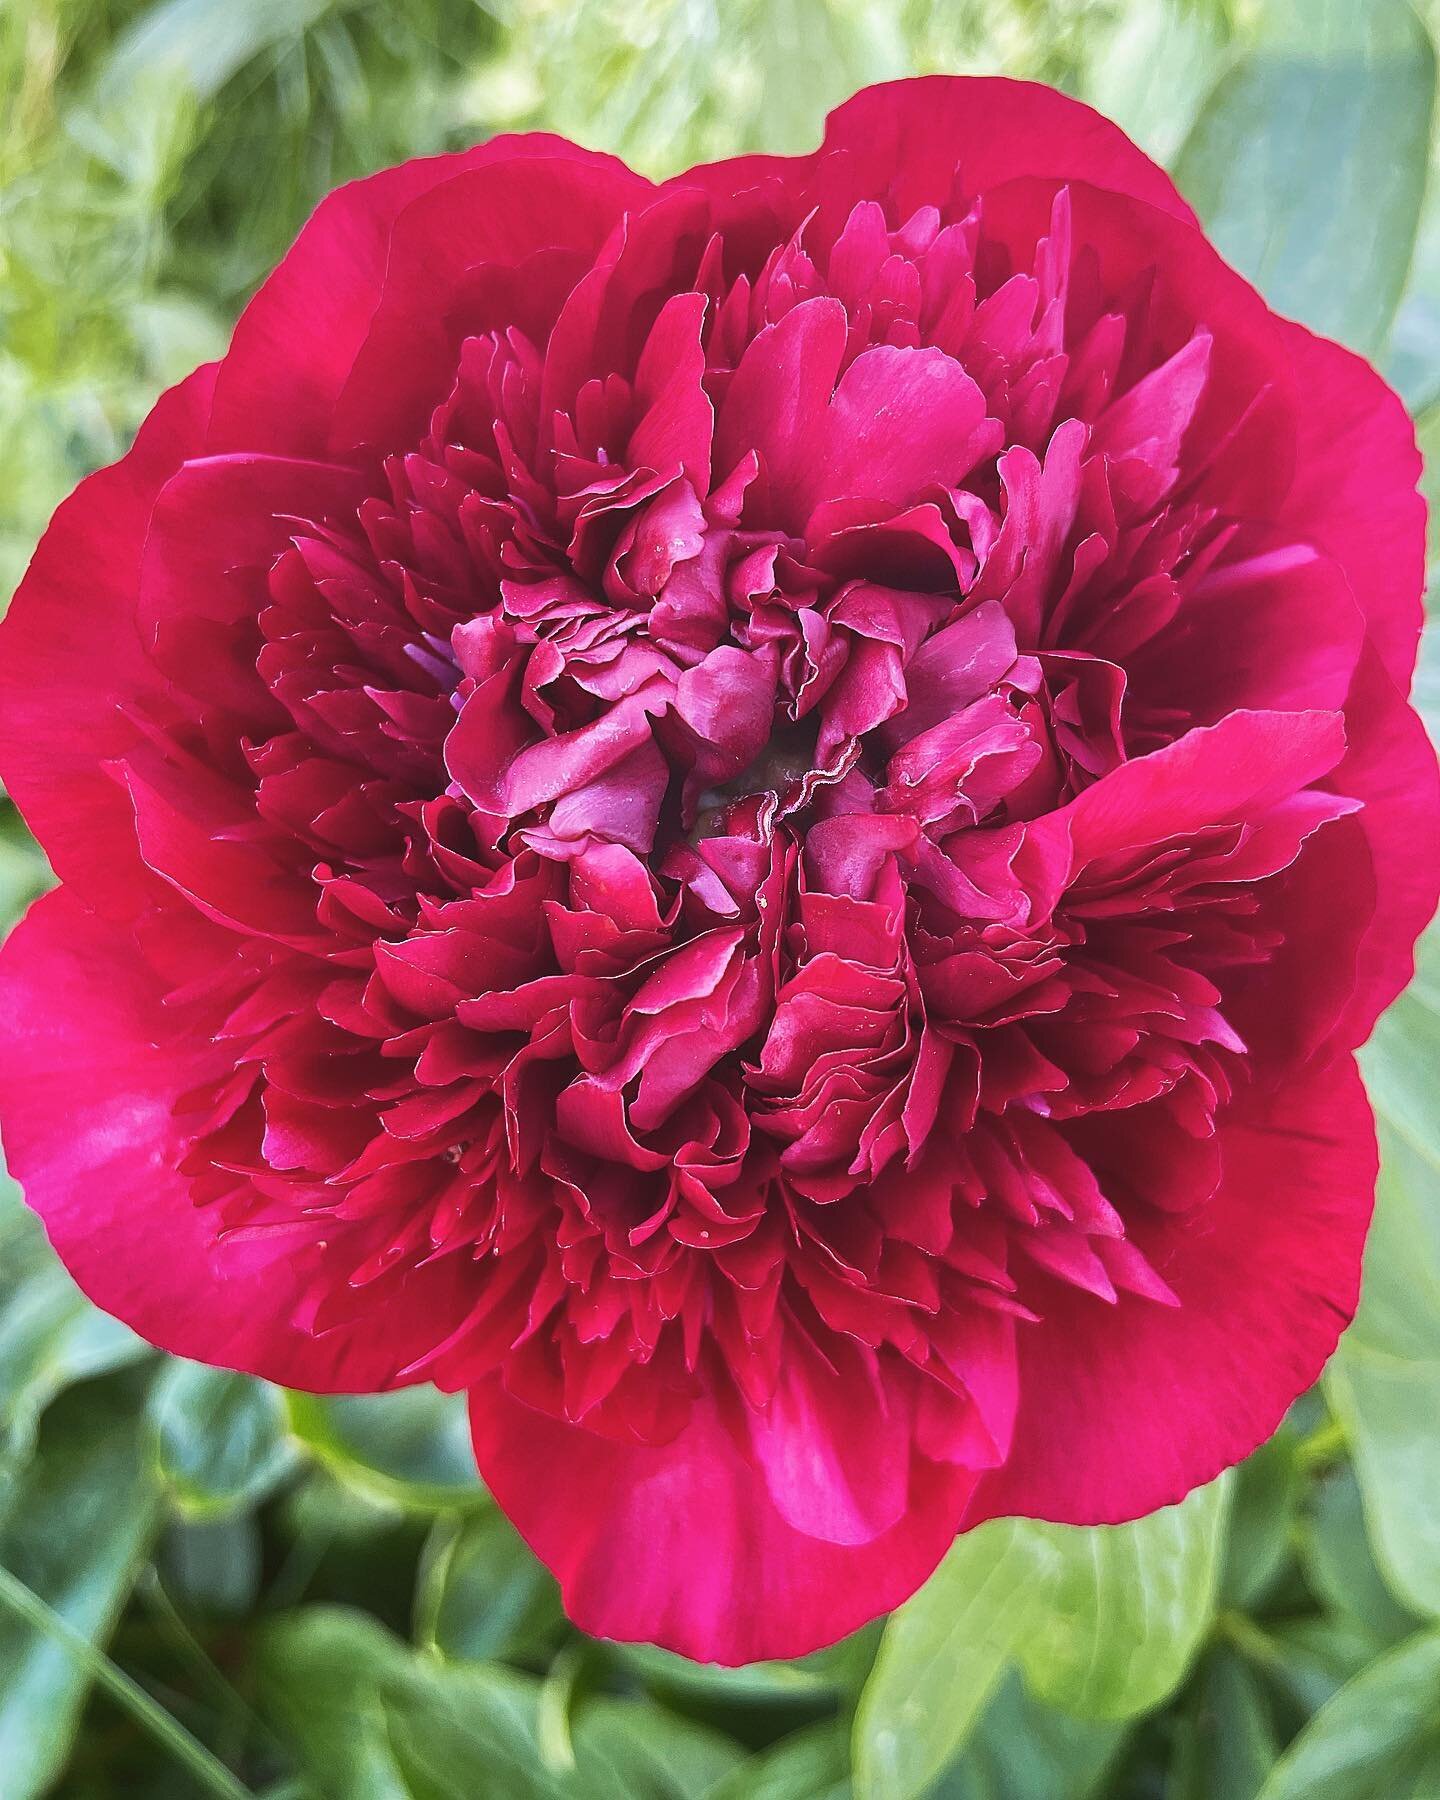 .
A few more peonies have opened up at Littlewell Farm this week, aren&rsquo;t they stunning! Our bed and breakfast is now open, so send us a DM or visit our website to book a stay and see the garden bloom with us.